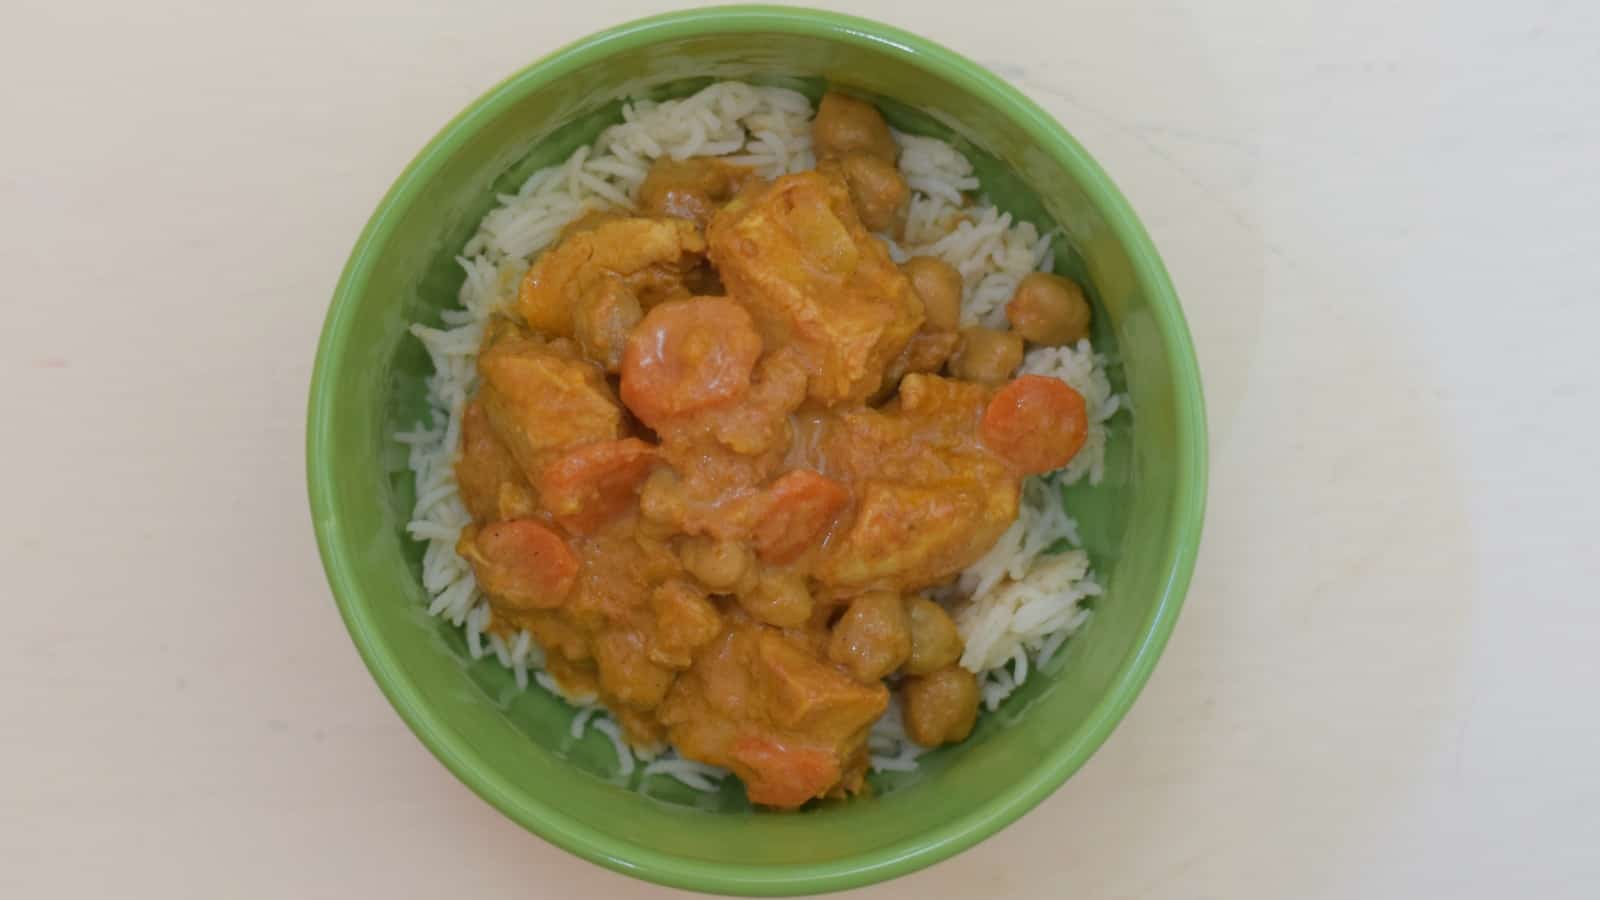 Overheat shot of chicken tikka masala in a green bowl on a white table.